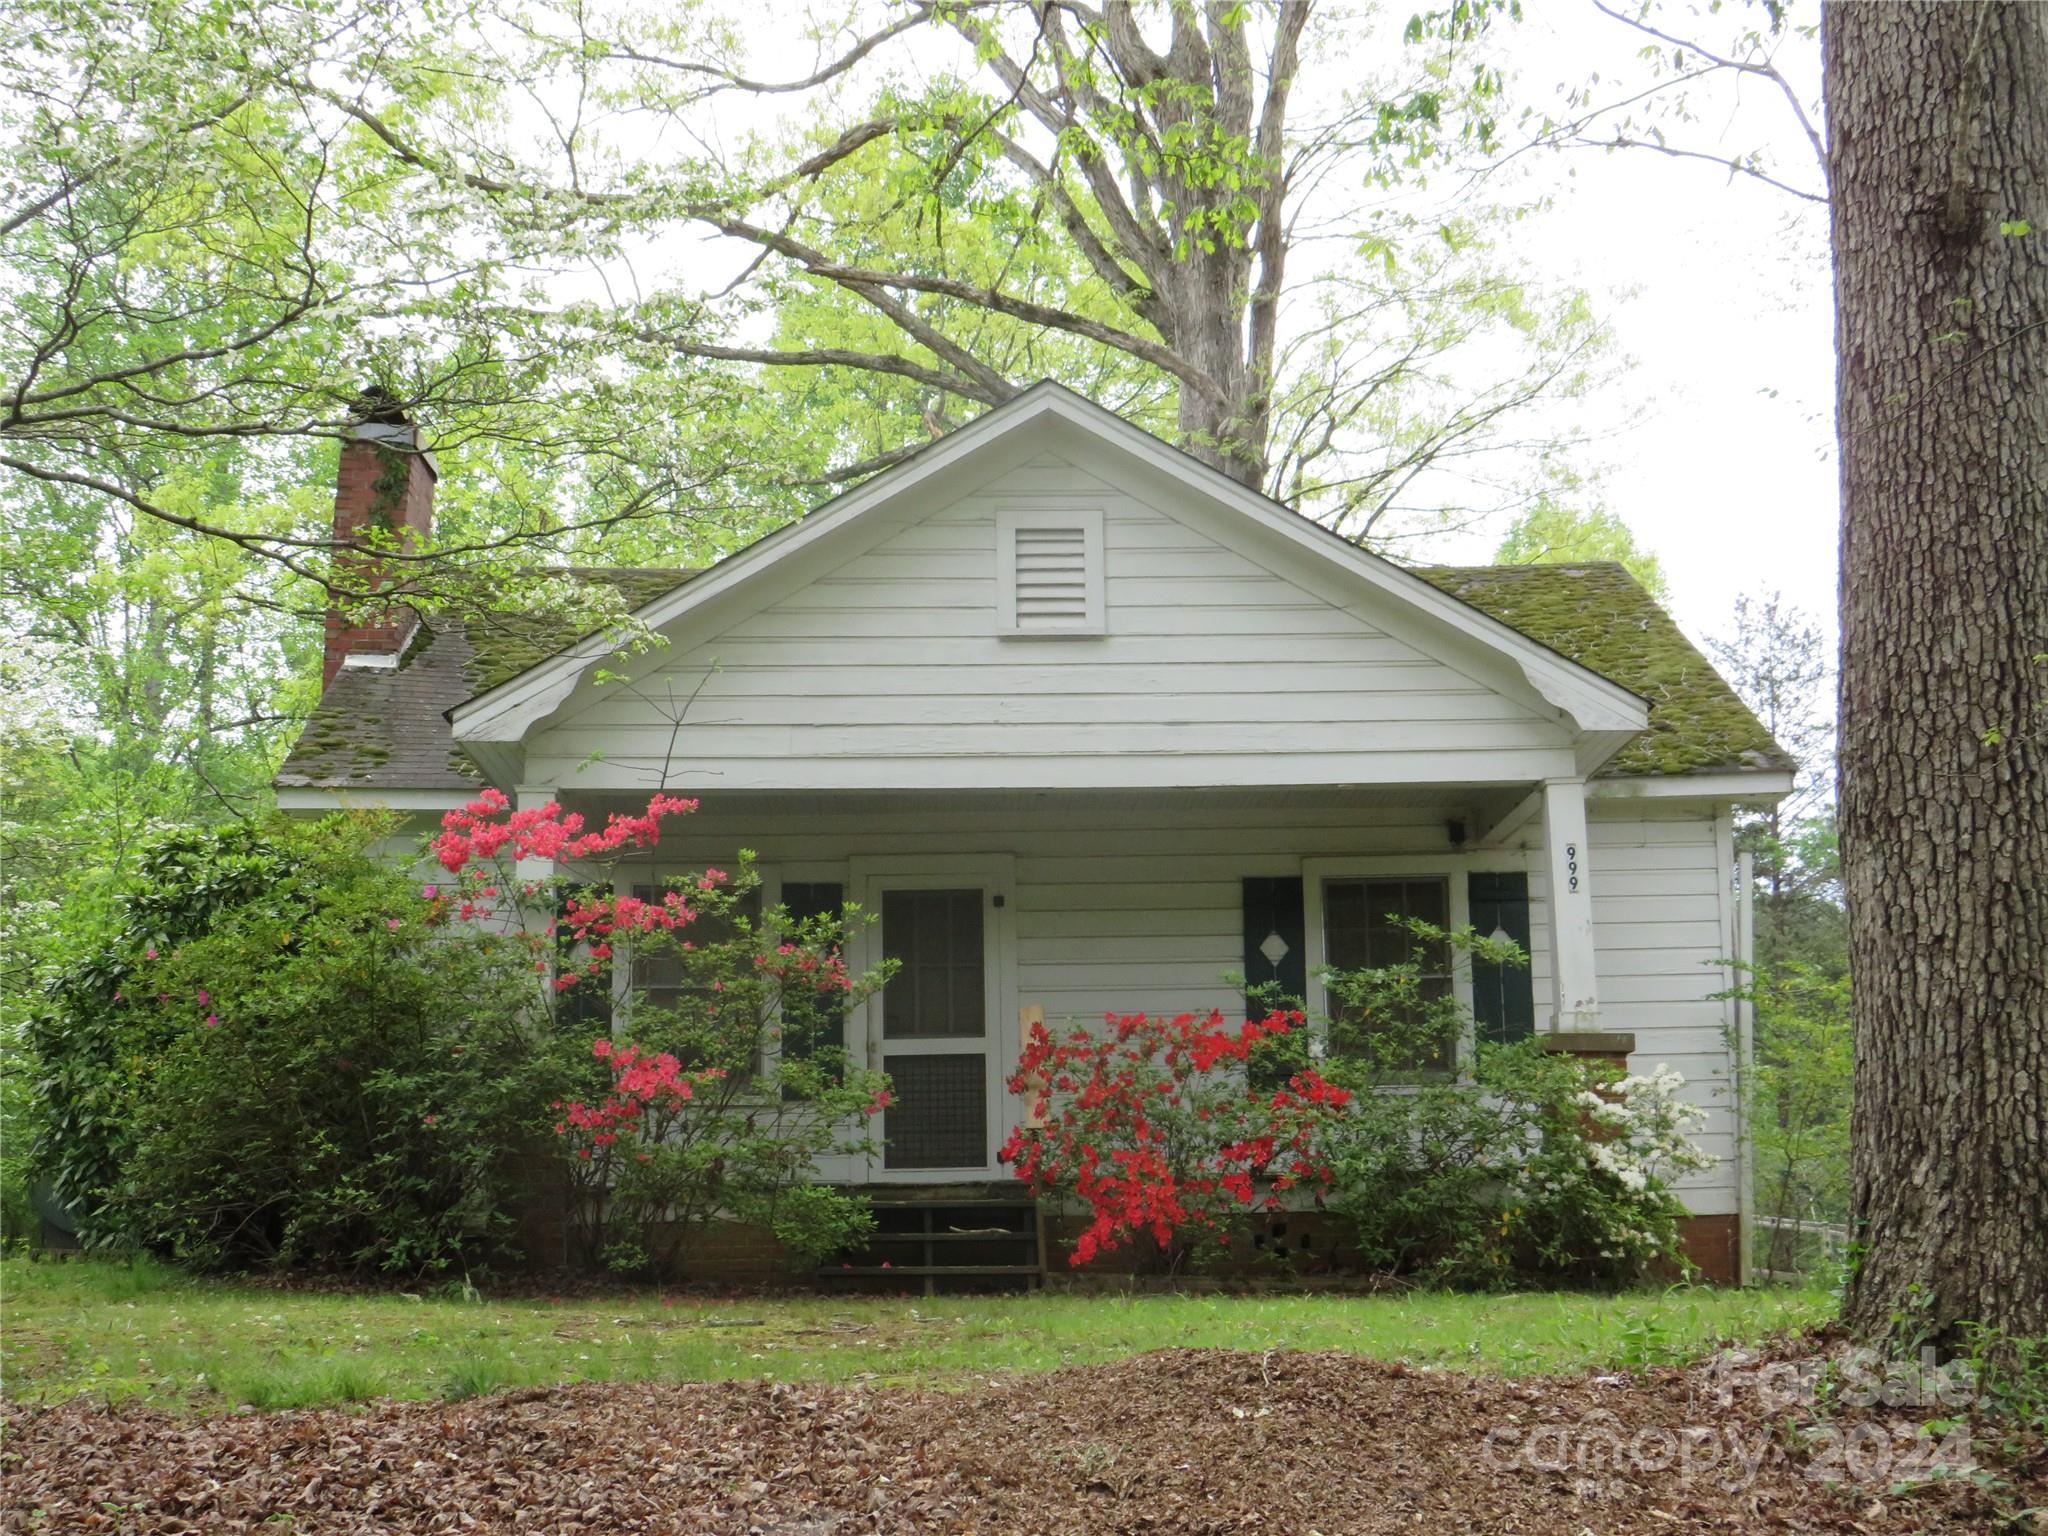 a front view of house with flowers